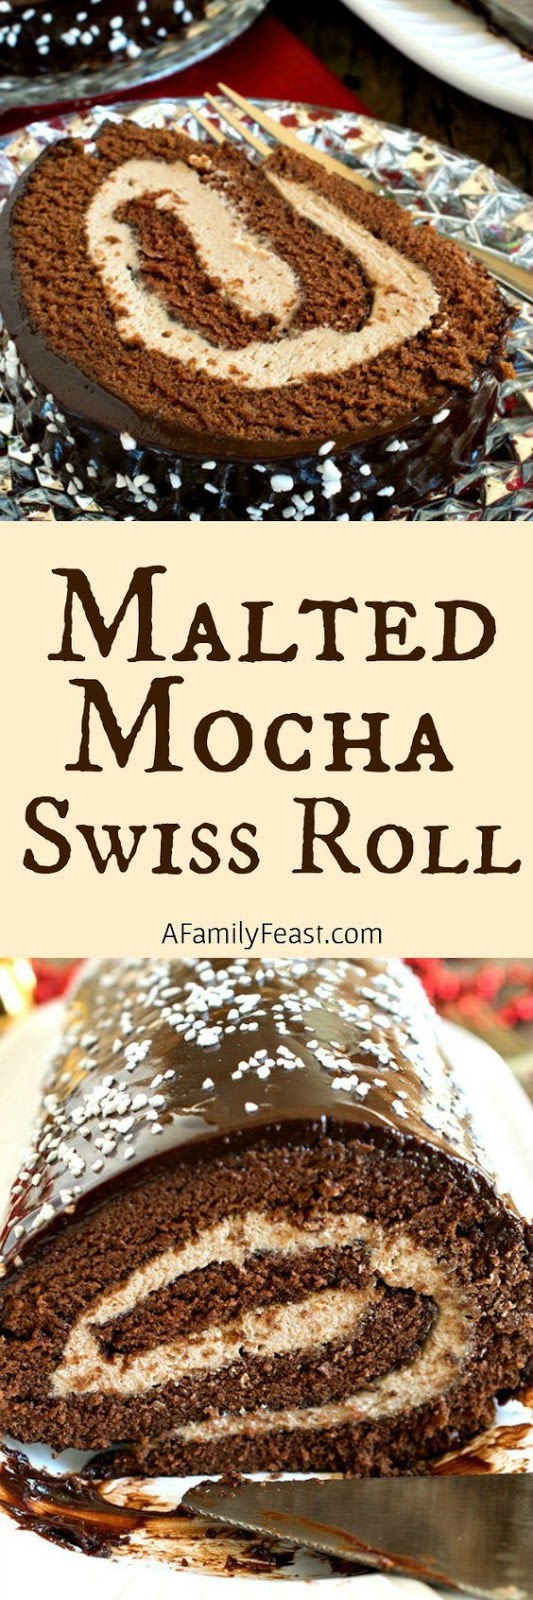 Malted Mocha Swiss Roll Recipes - Best Recipes Collection | All ...